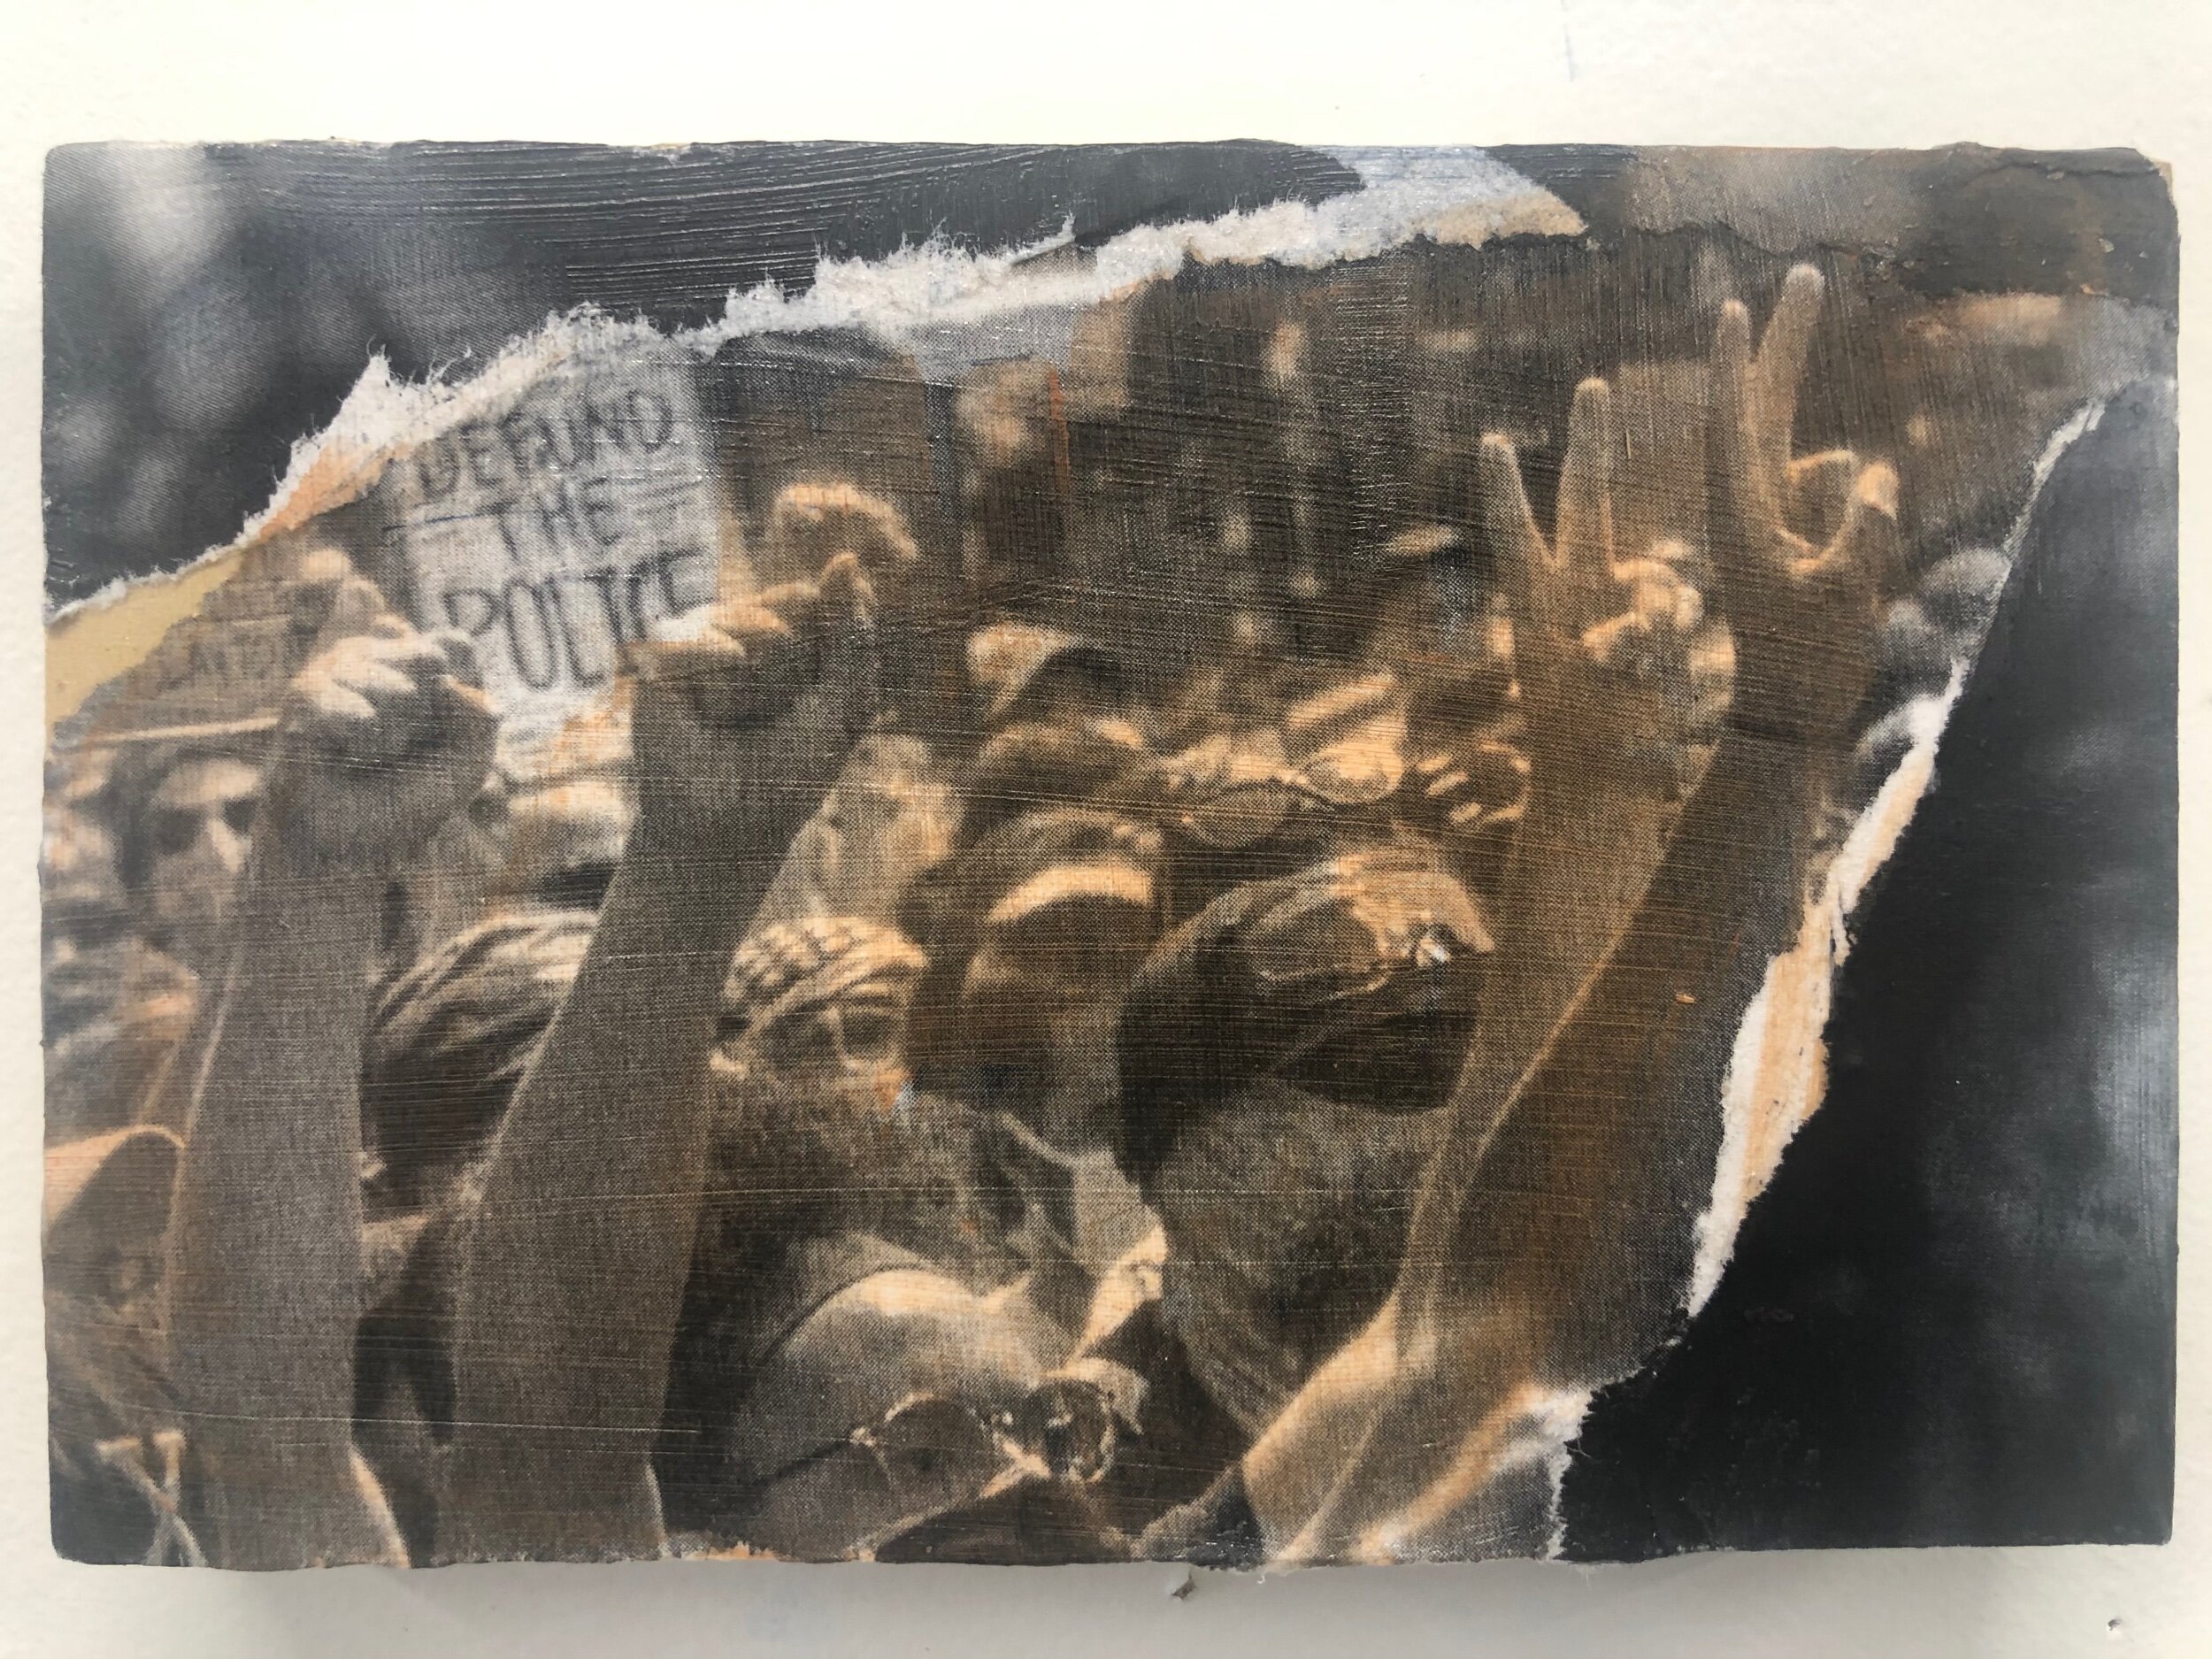 Peaceful Resistance, photographs, collage and acrylic on panel, 4" x 6", 2021.jpeg